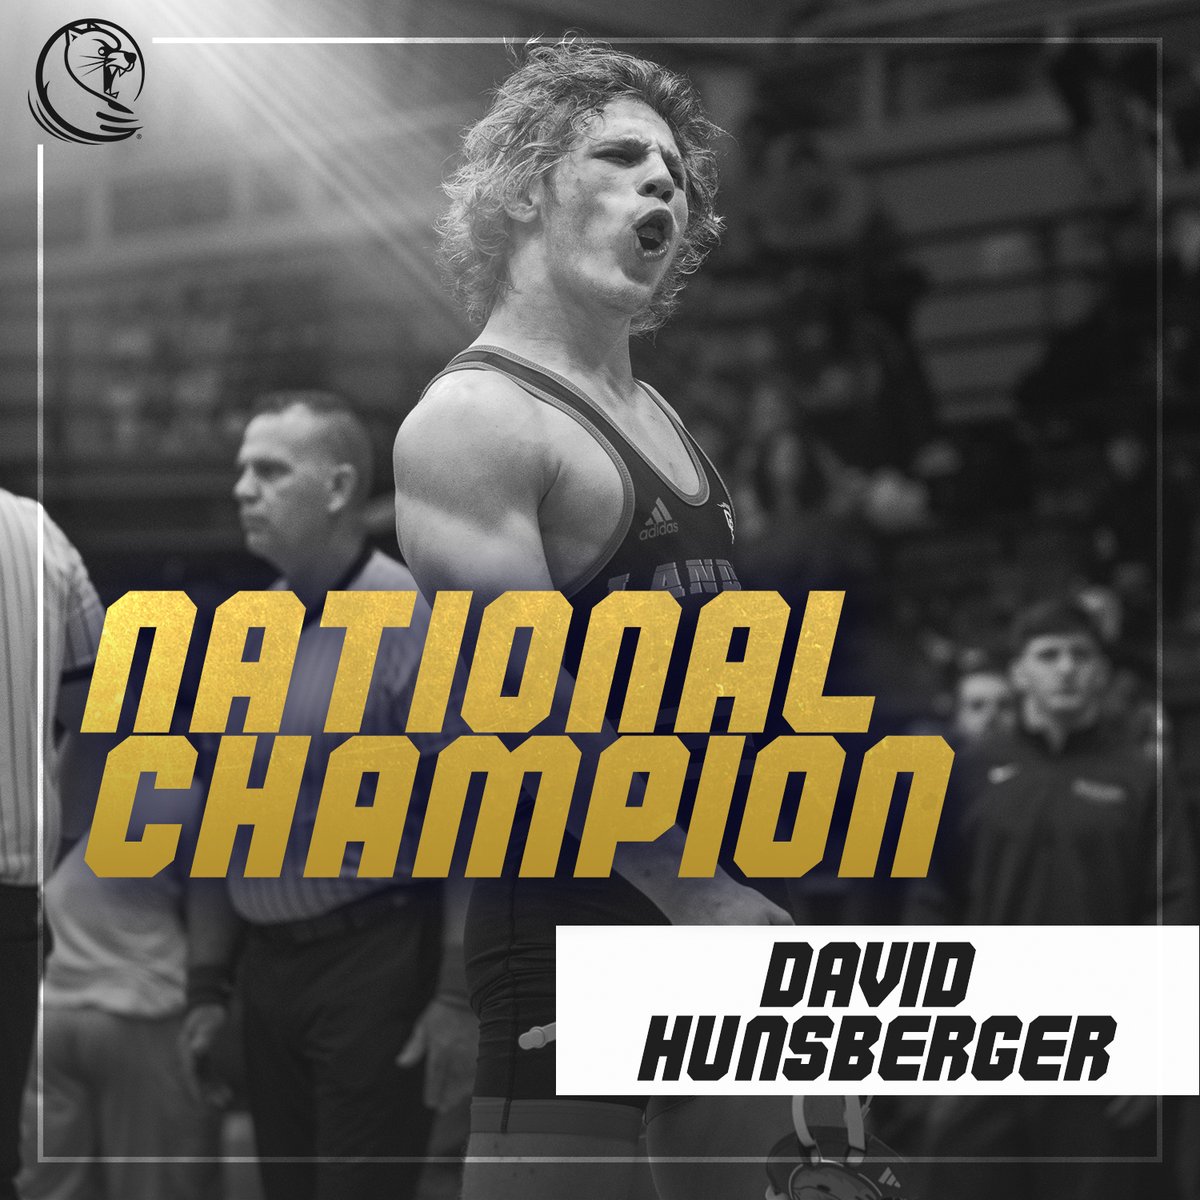 DAVID HUNSBERGER IS YOUR 165-LB NATIONAL CHAMPION!!!

He joins Zeth Brower as Bearcat National Champions!

#OneMoreStep | #cLawsUp